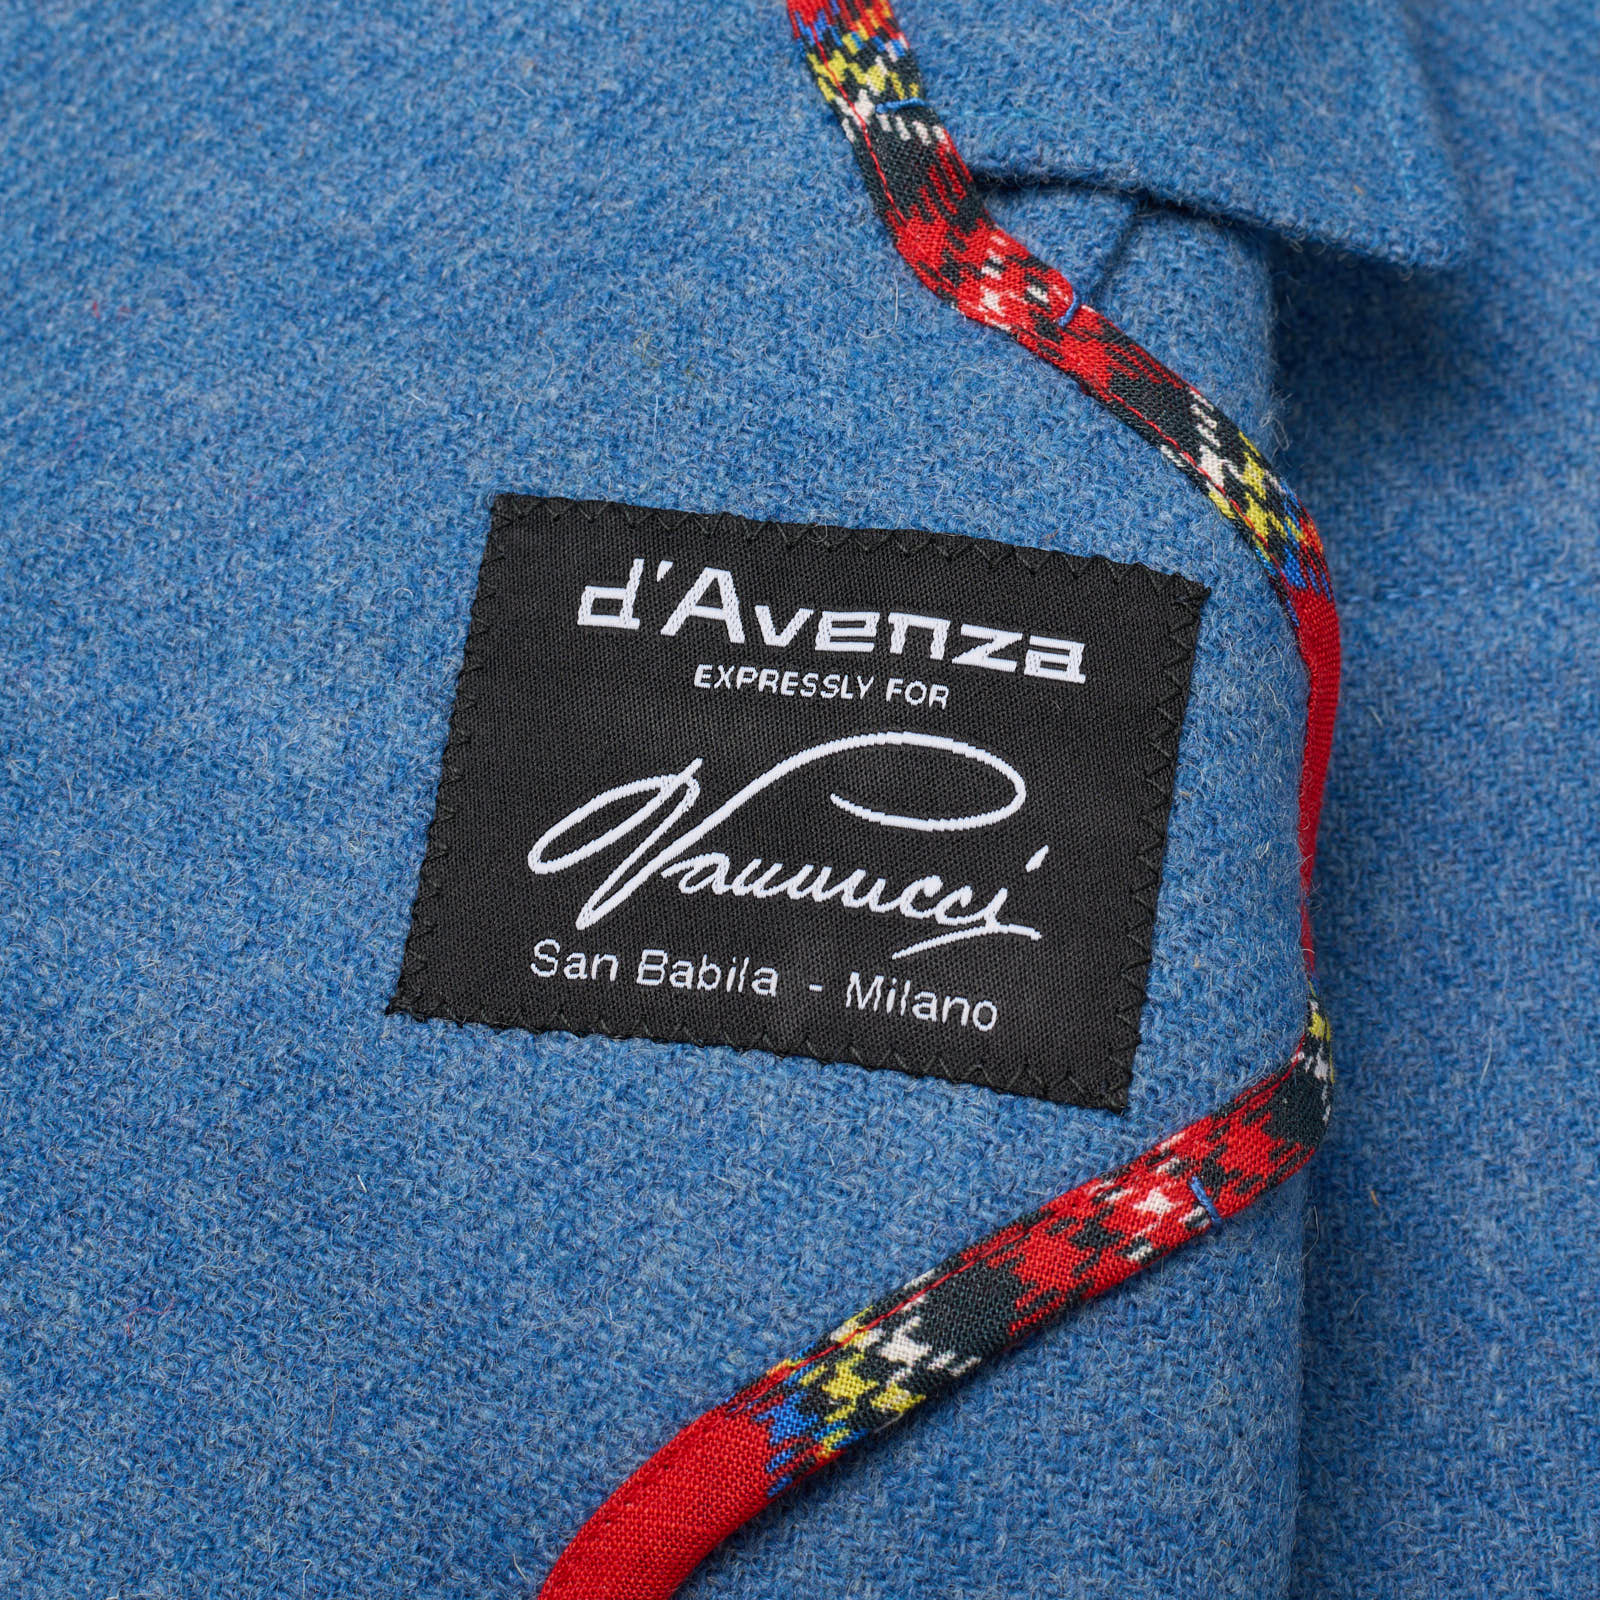 D'AVENZA Forte for VANNUCCI Blue Wool Unlined Tweed Jacket EU 48 NEW US 38